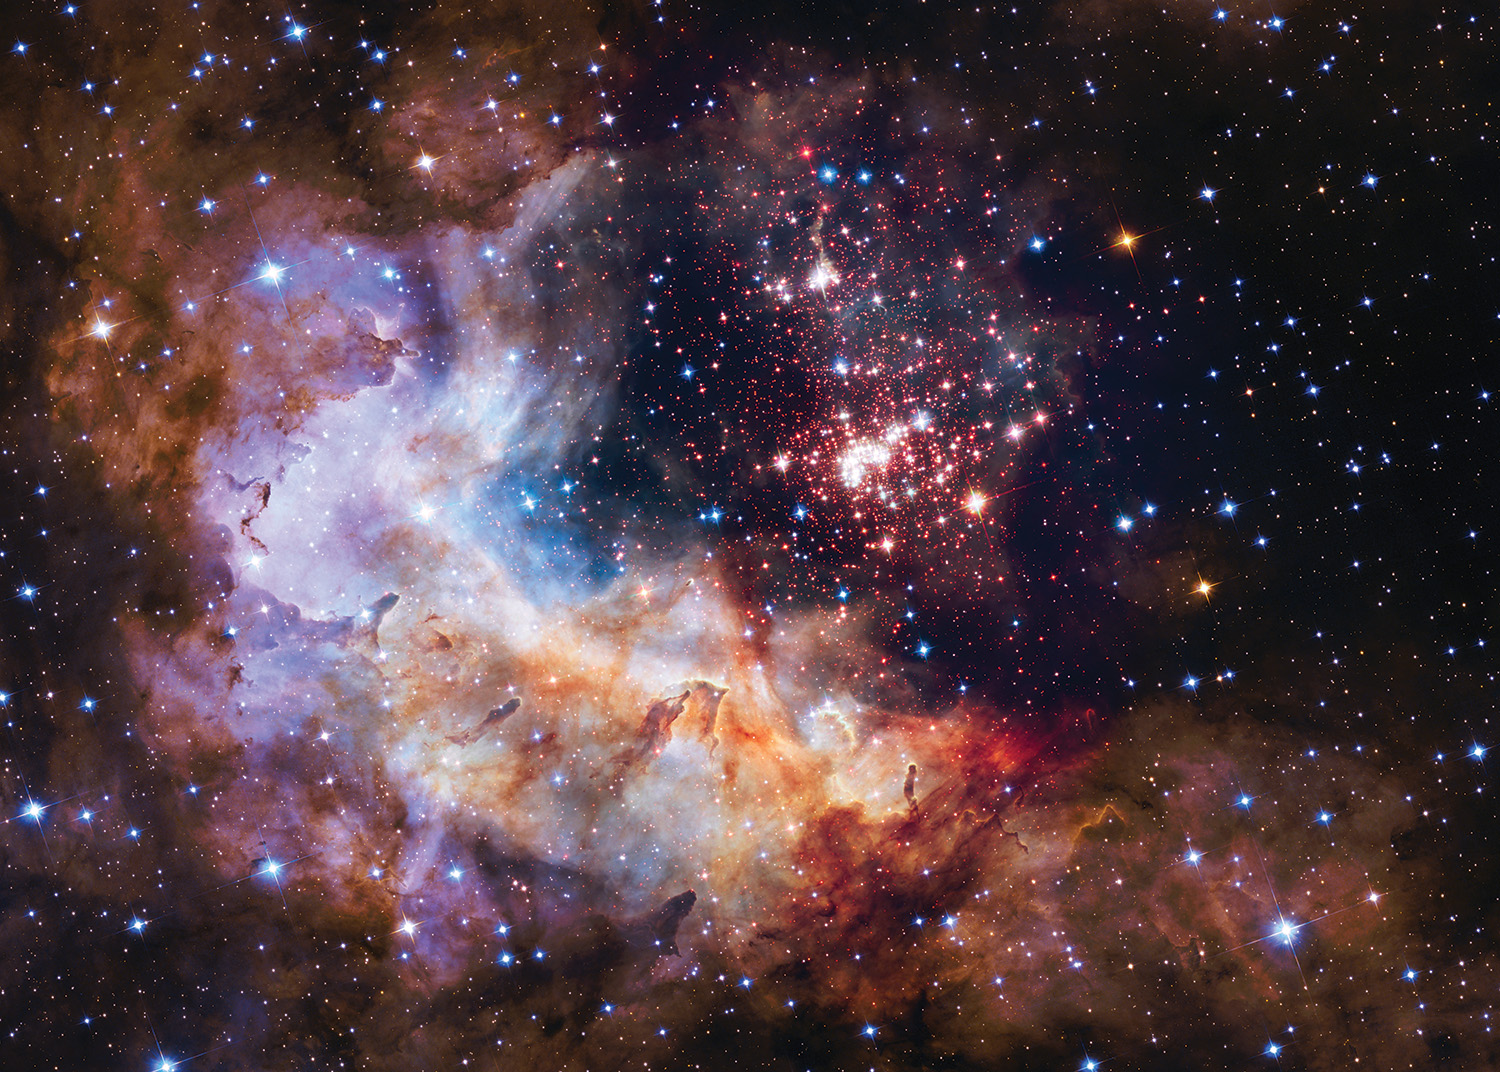 A cluster of small stars sits near the middle of the image. The stars are red, white, blue, and glowing. They are surrounded by a cloud of purple, red, orange, and white vapors, also glowing. Large and tiny stars with points fill the black background.